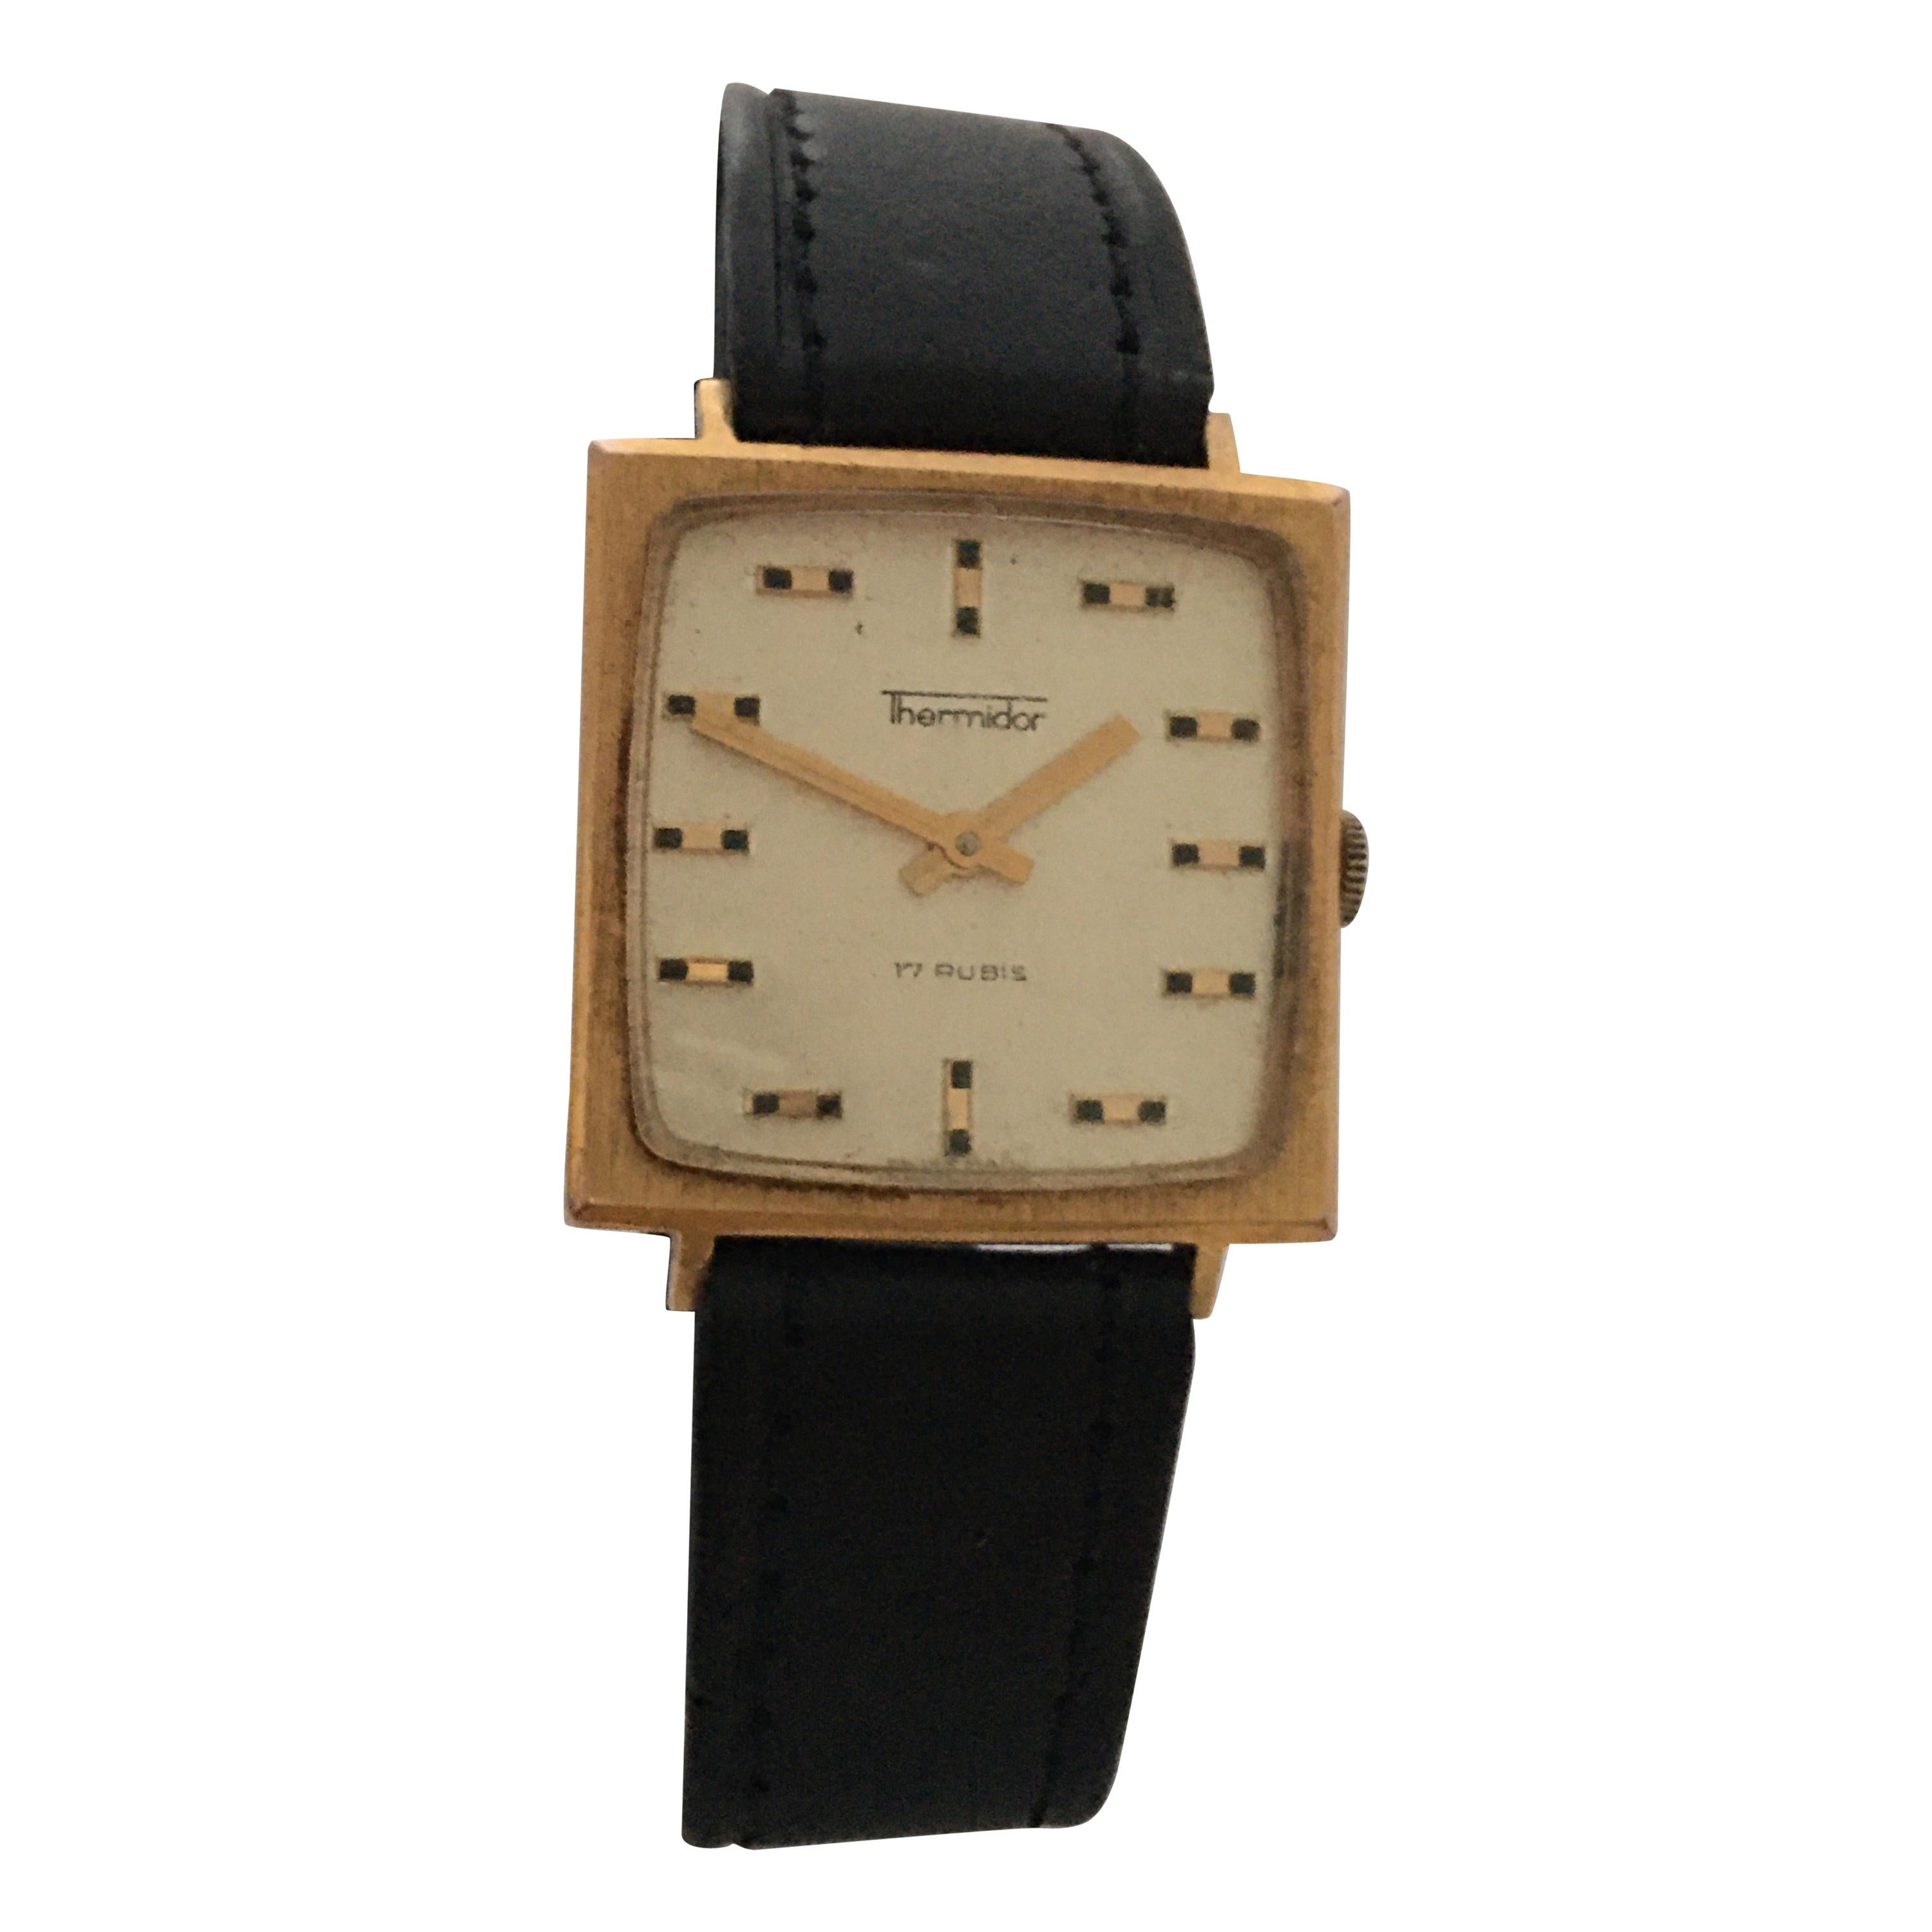 Vintage Gold-Plated and Steel Swiss Mechanical Watch